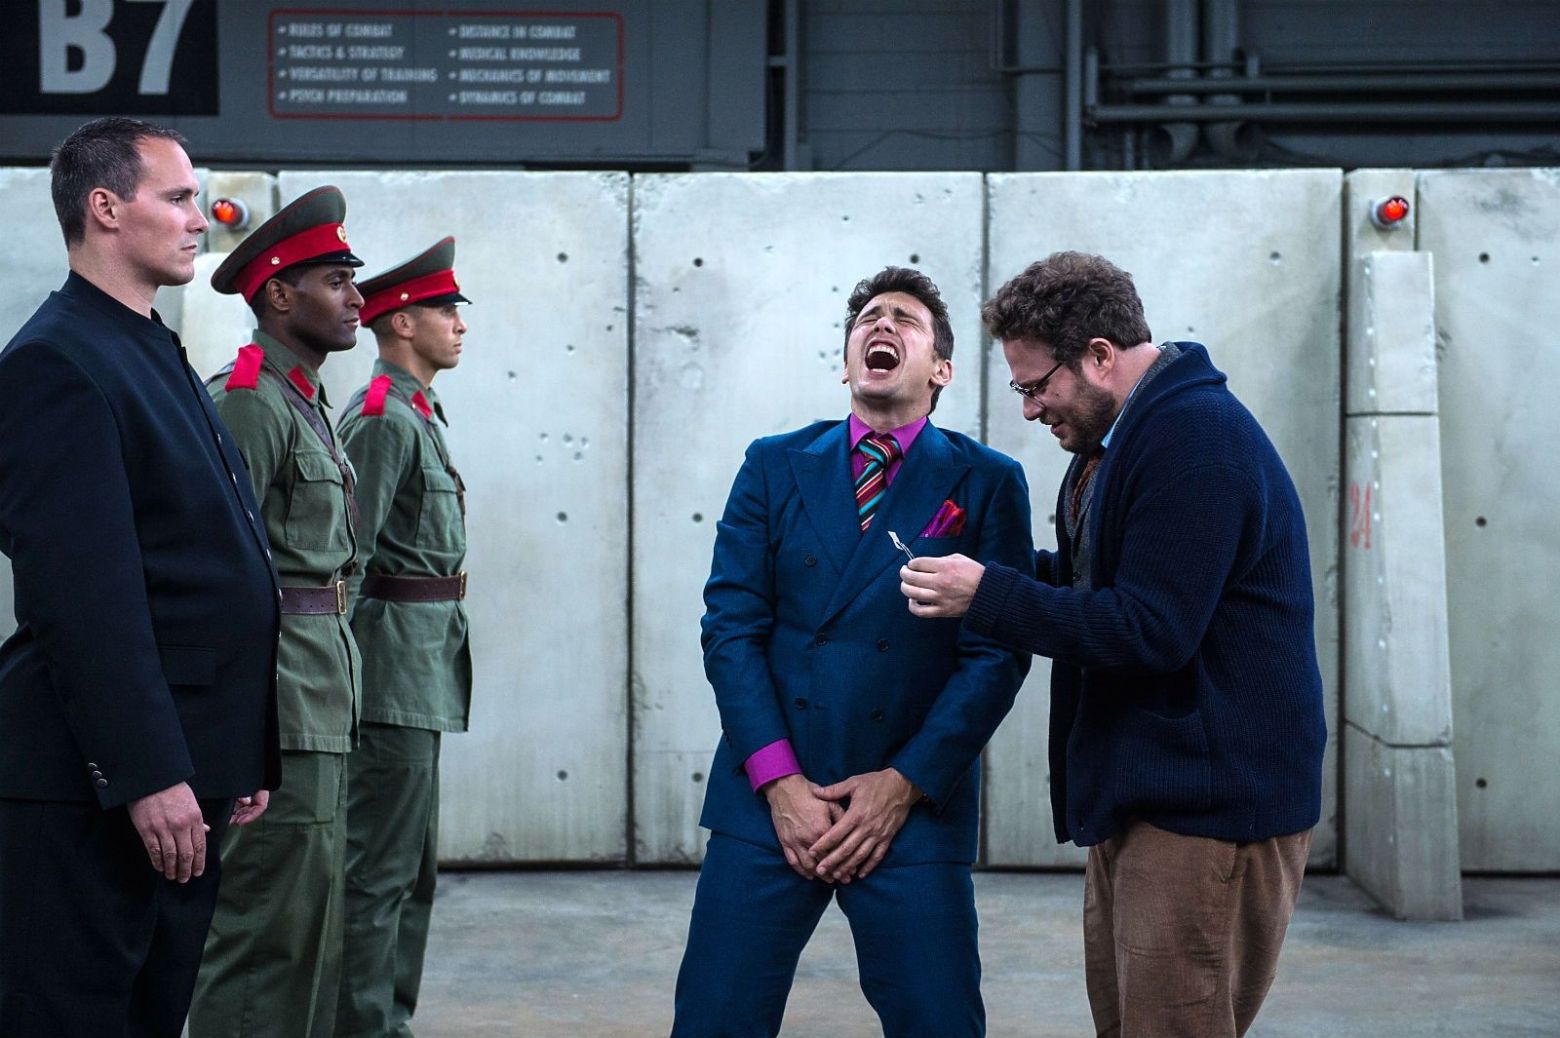 Bust terrorists in the balls by seeing The Interview. 